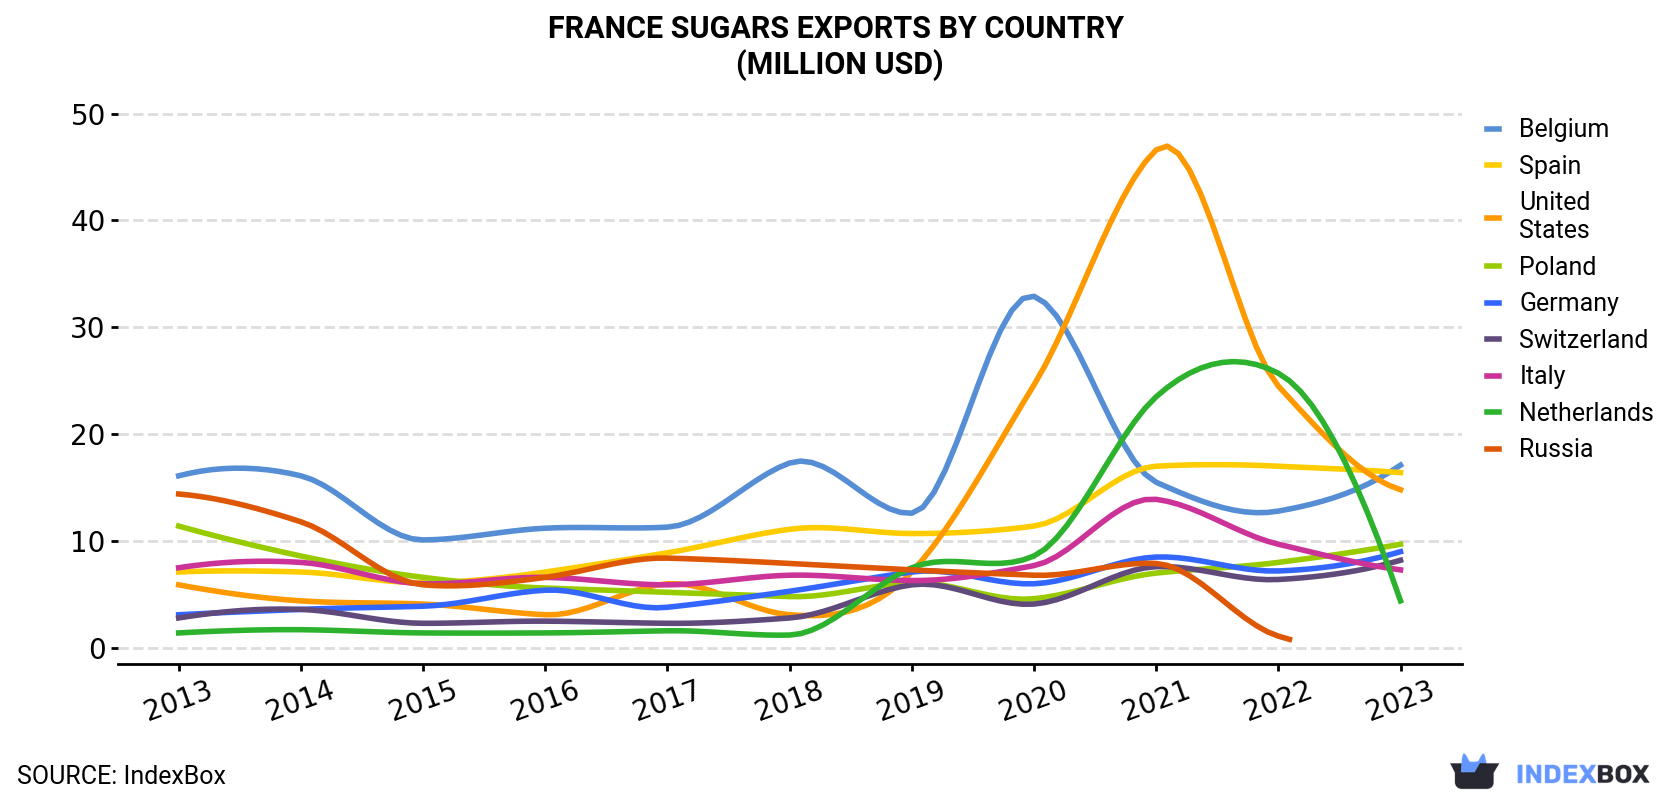 France Sugars Exports By Country (Million USD)